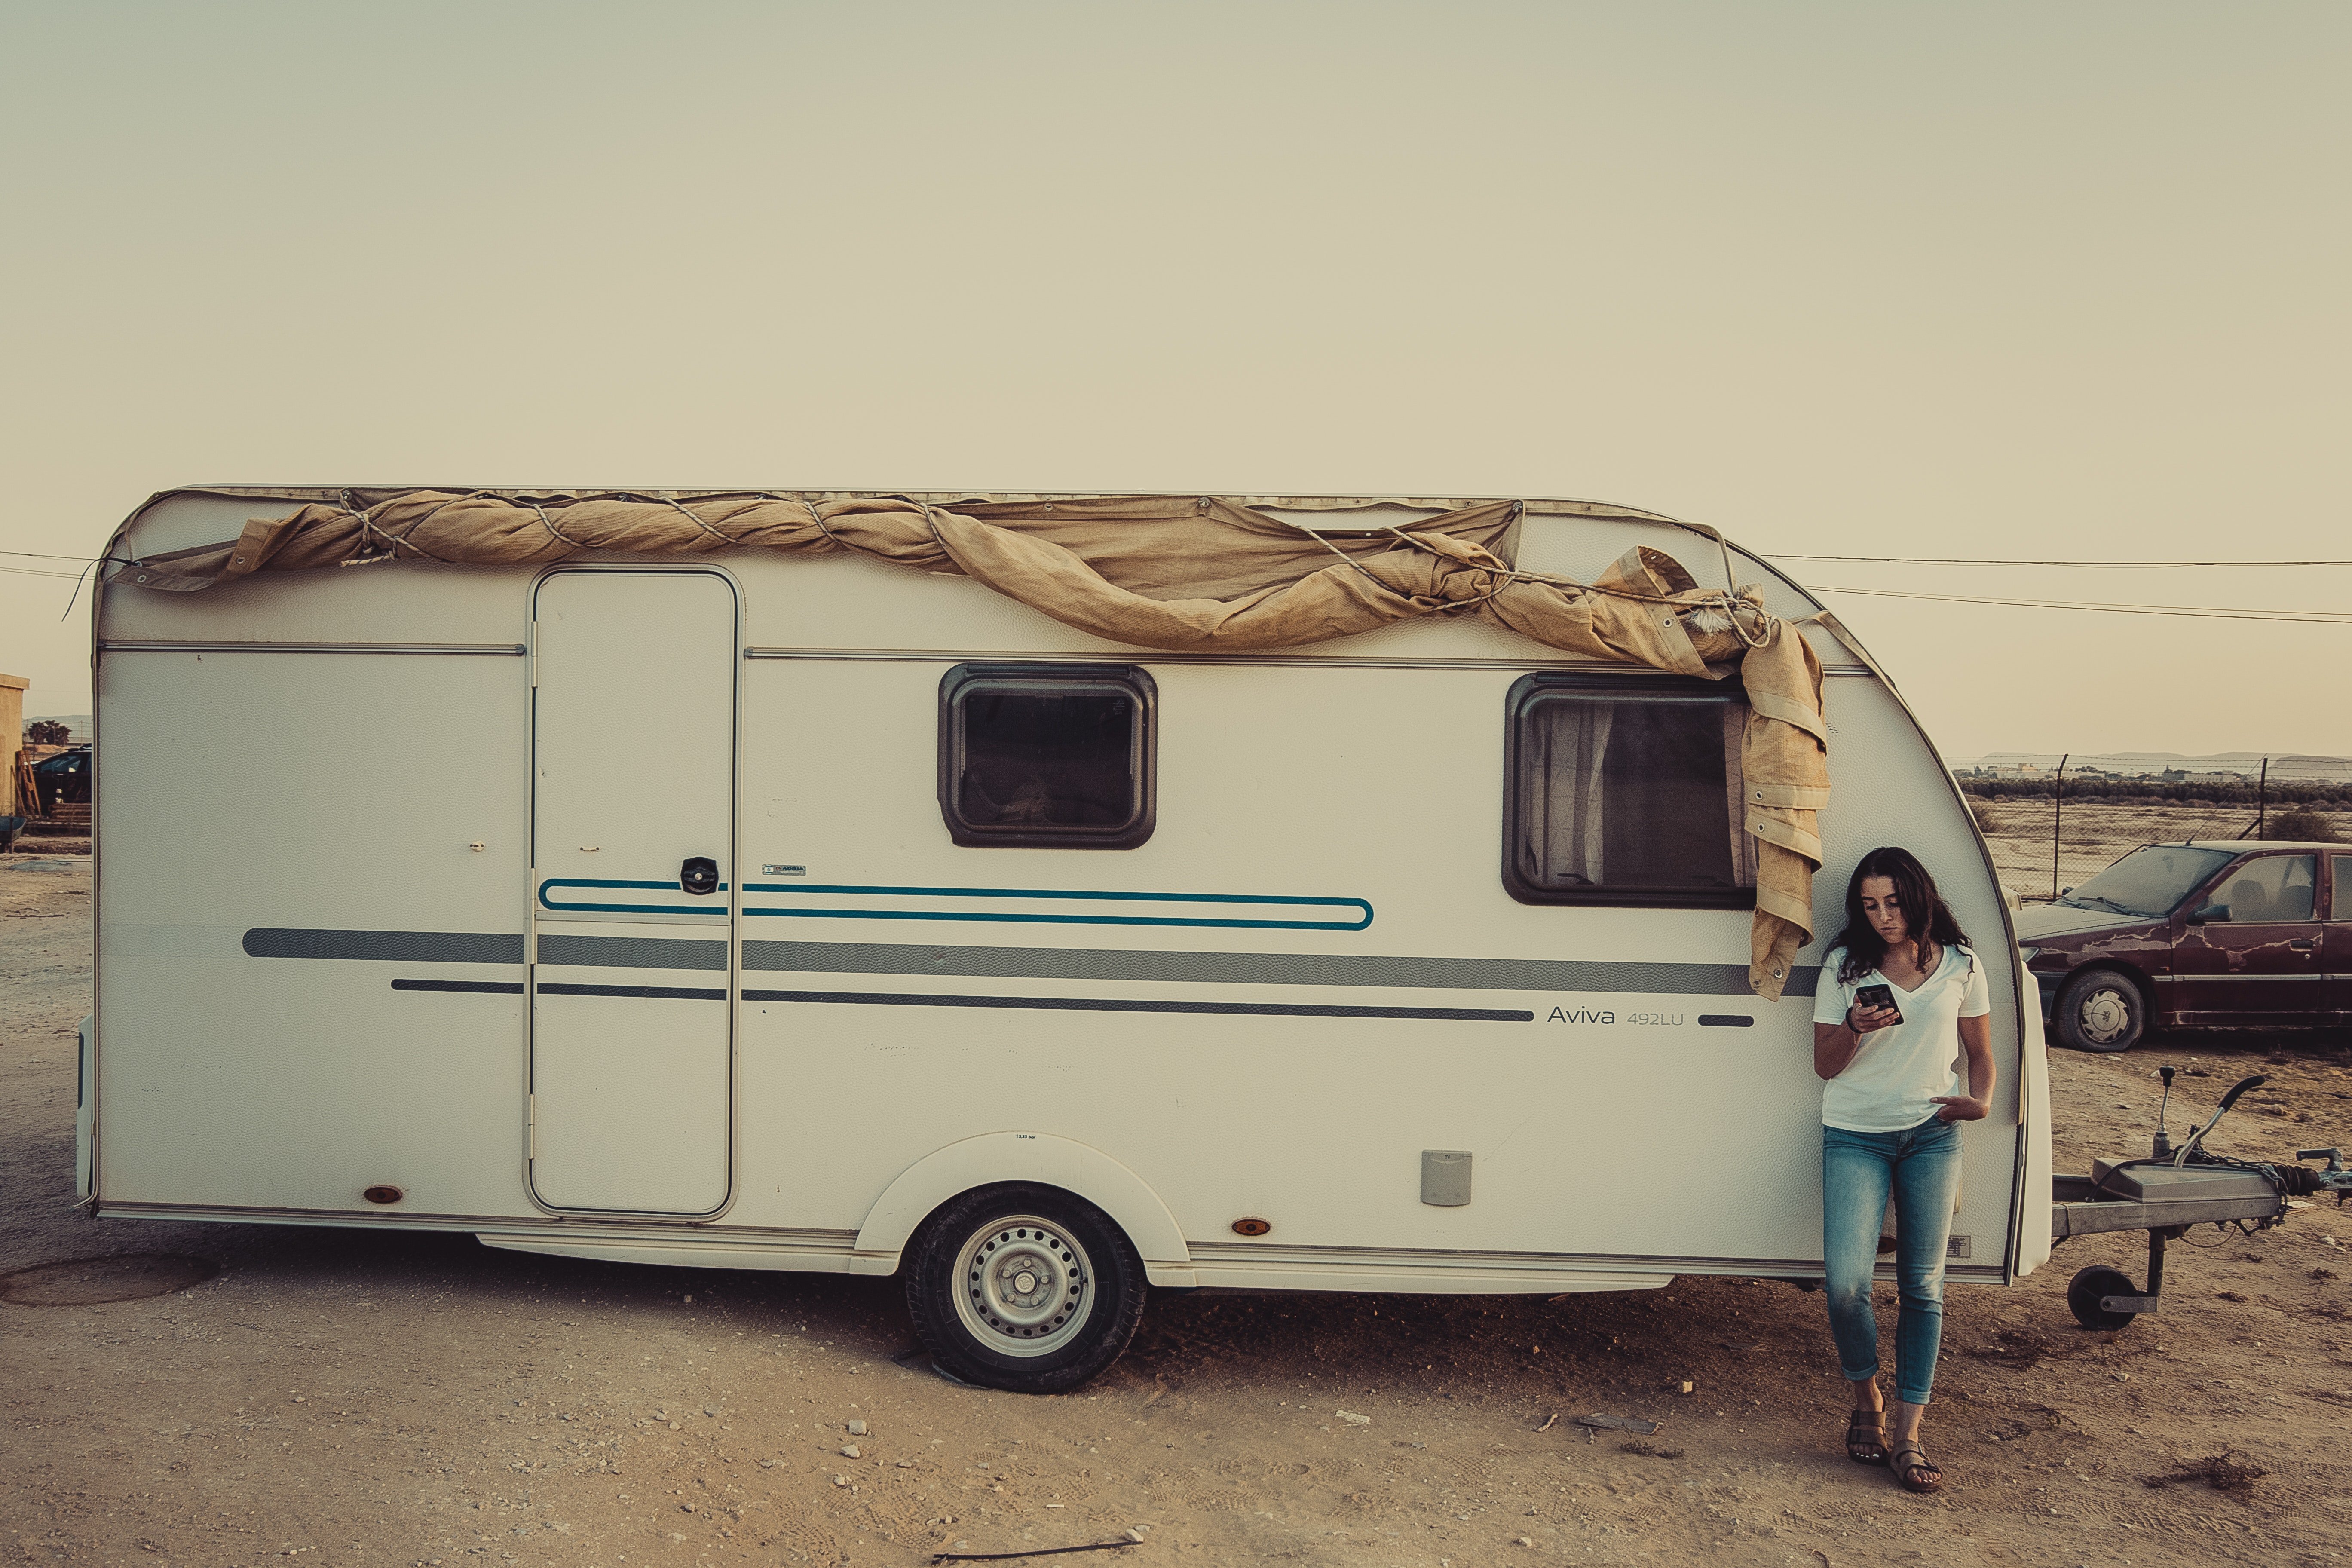 Tom and his mom lived in a trailer. | Source: Pexels